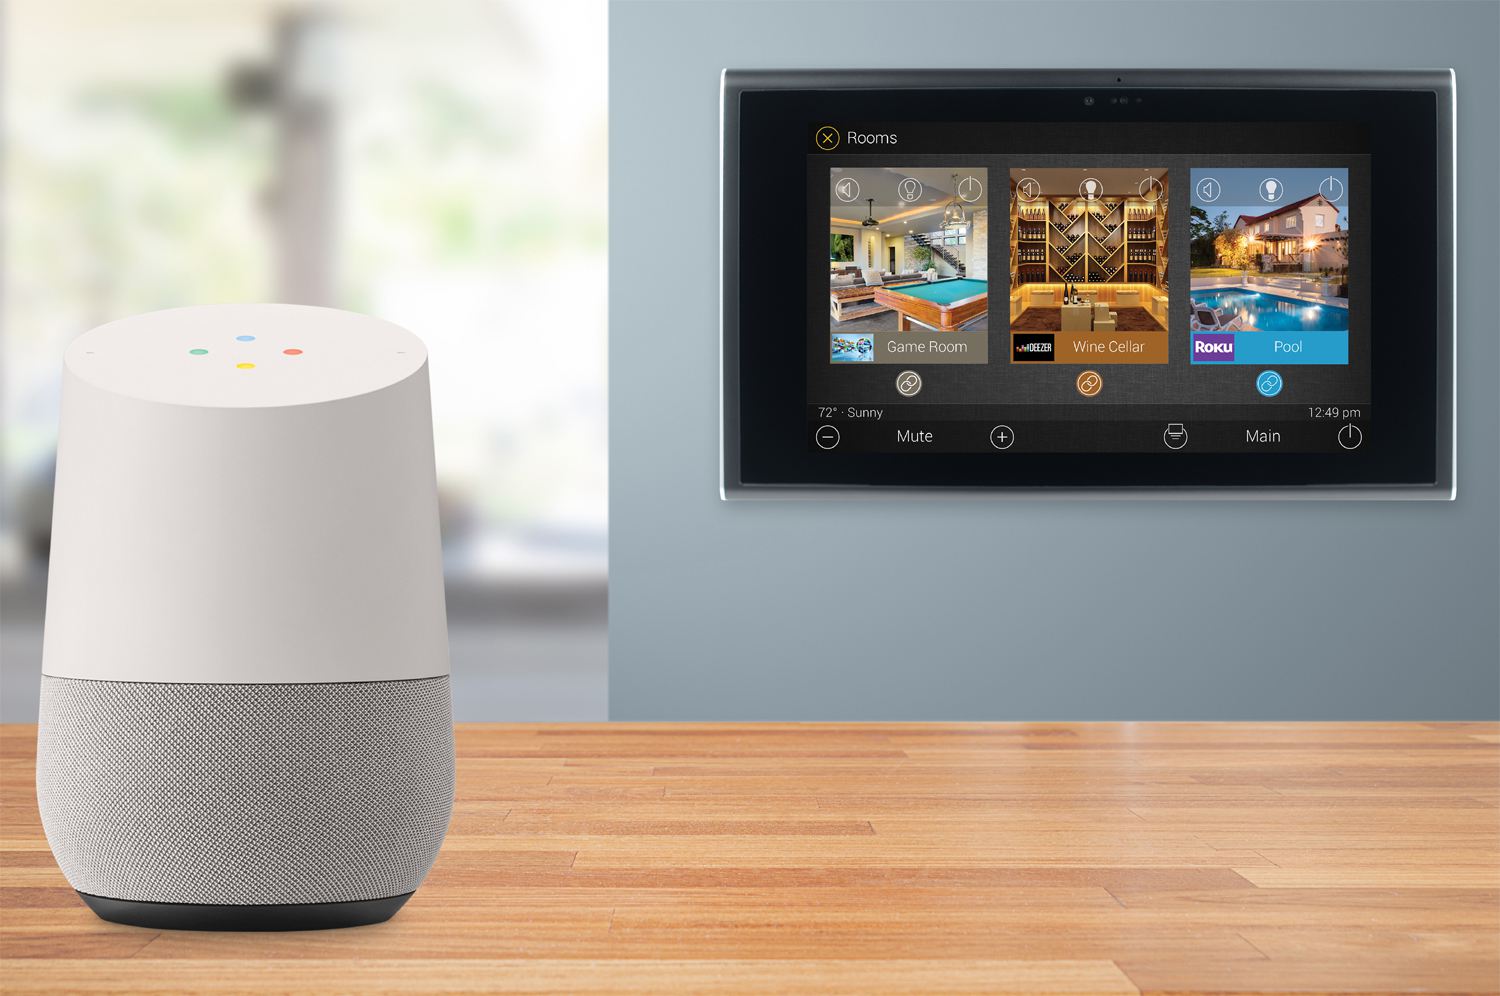 How To Turn On Smart TV With Google Home